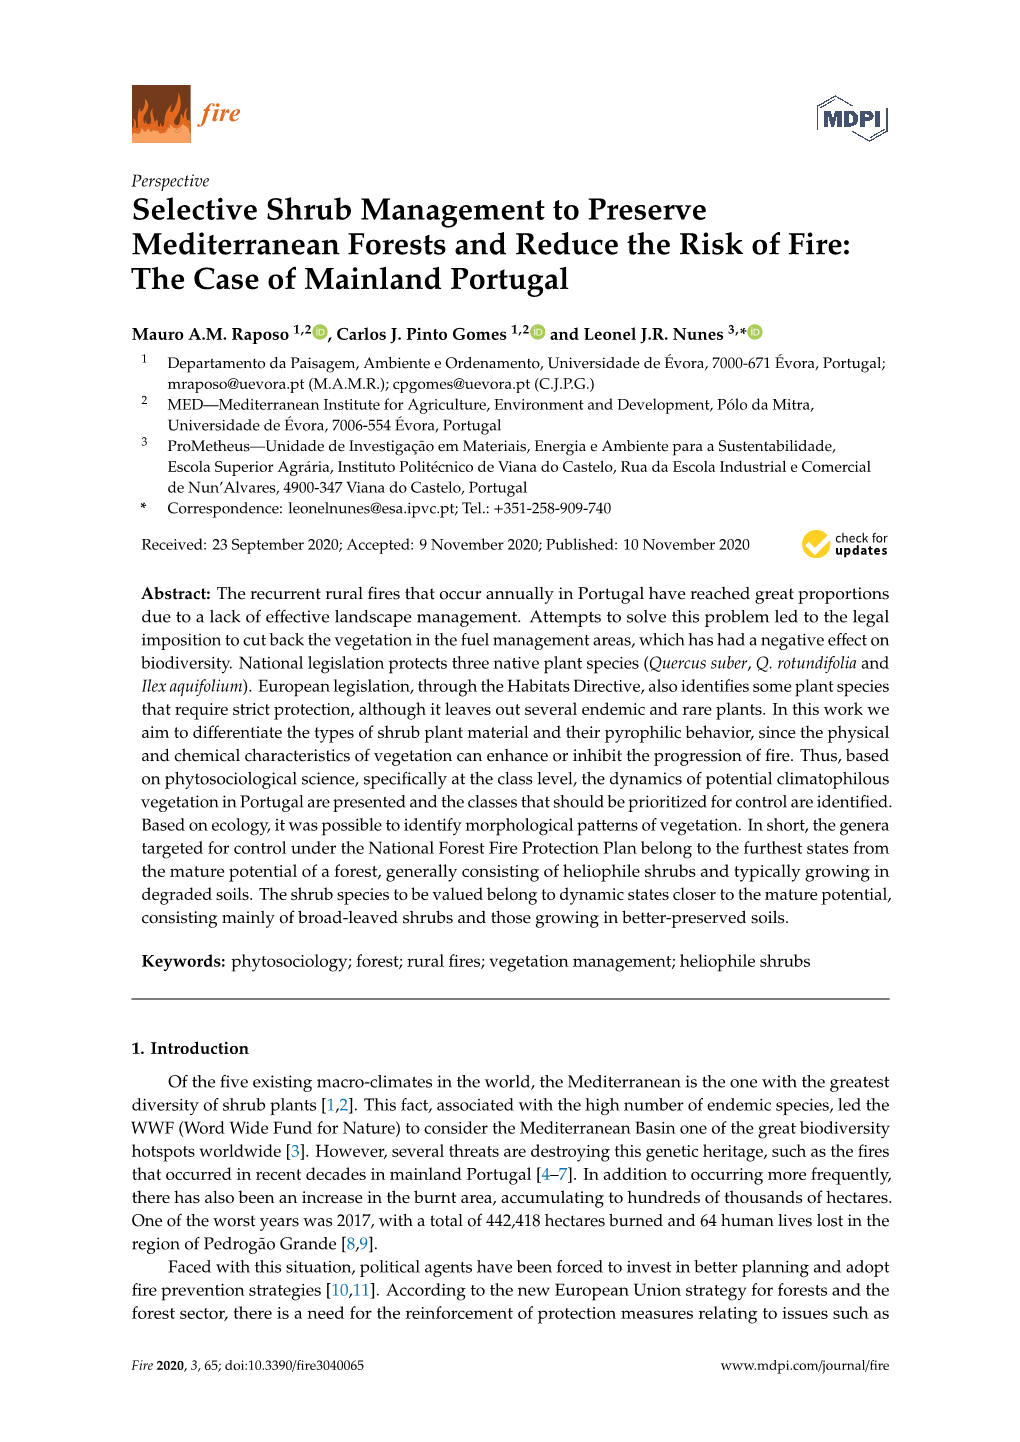 Selective Shrub Management to Preserve Mediterranean Forests and Reduce the Risk of Fire: the Case of Mainland Portugal